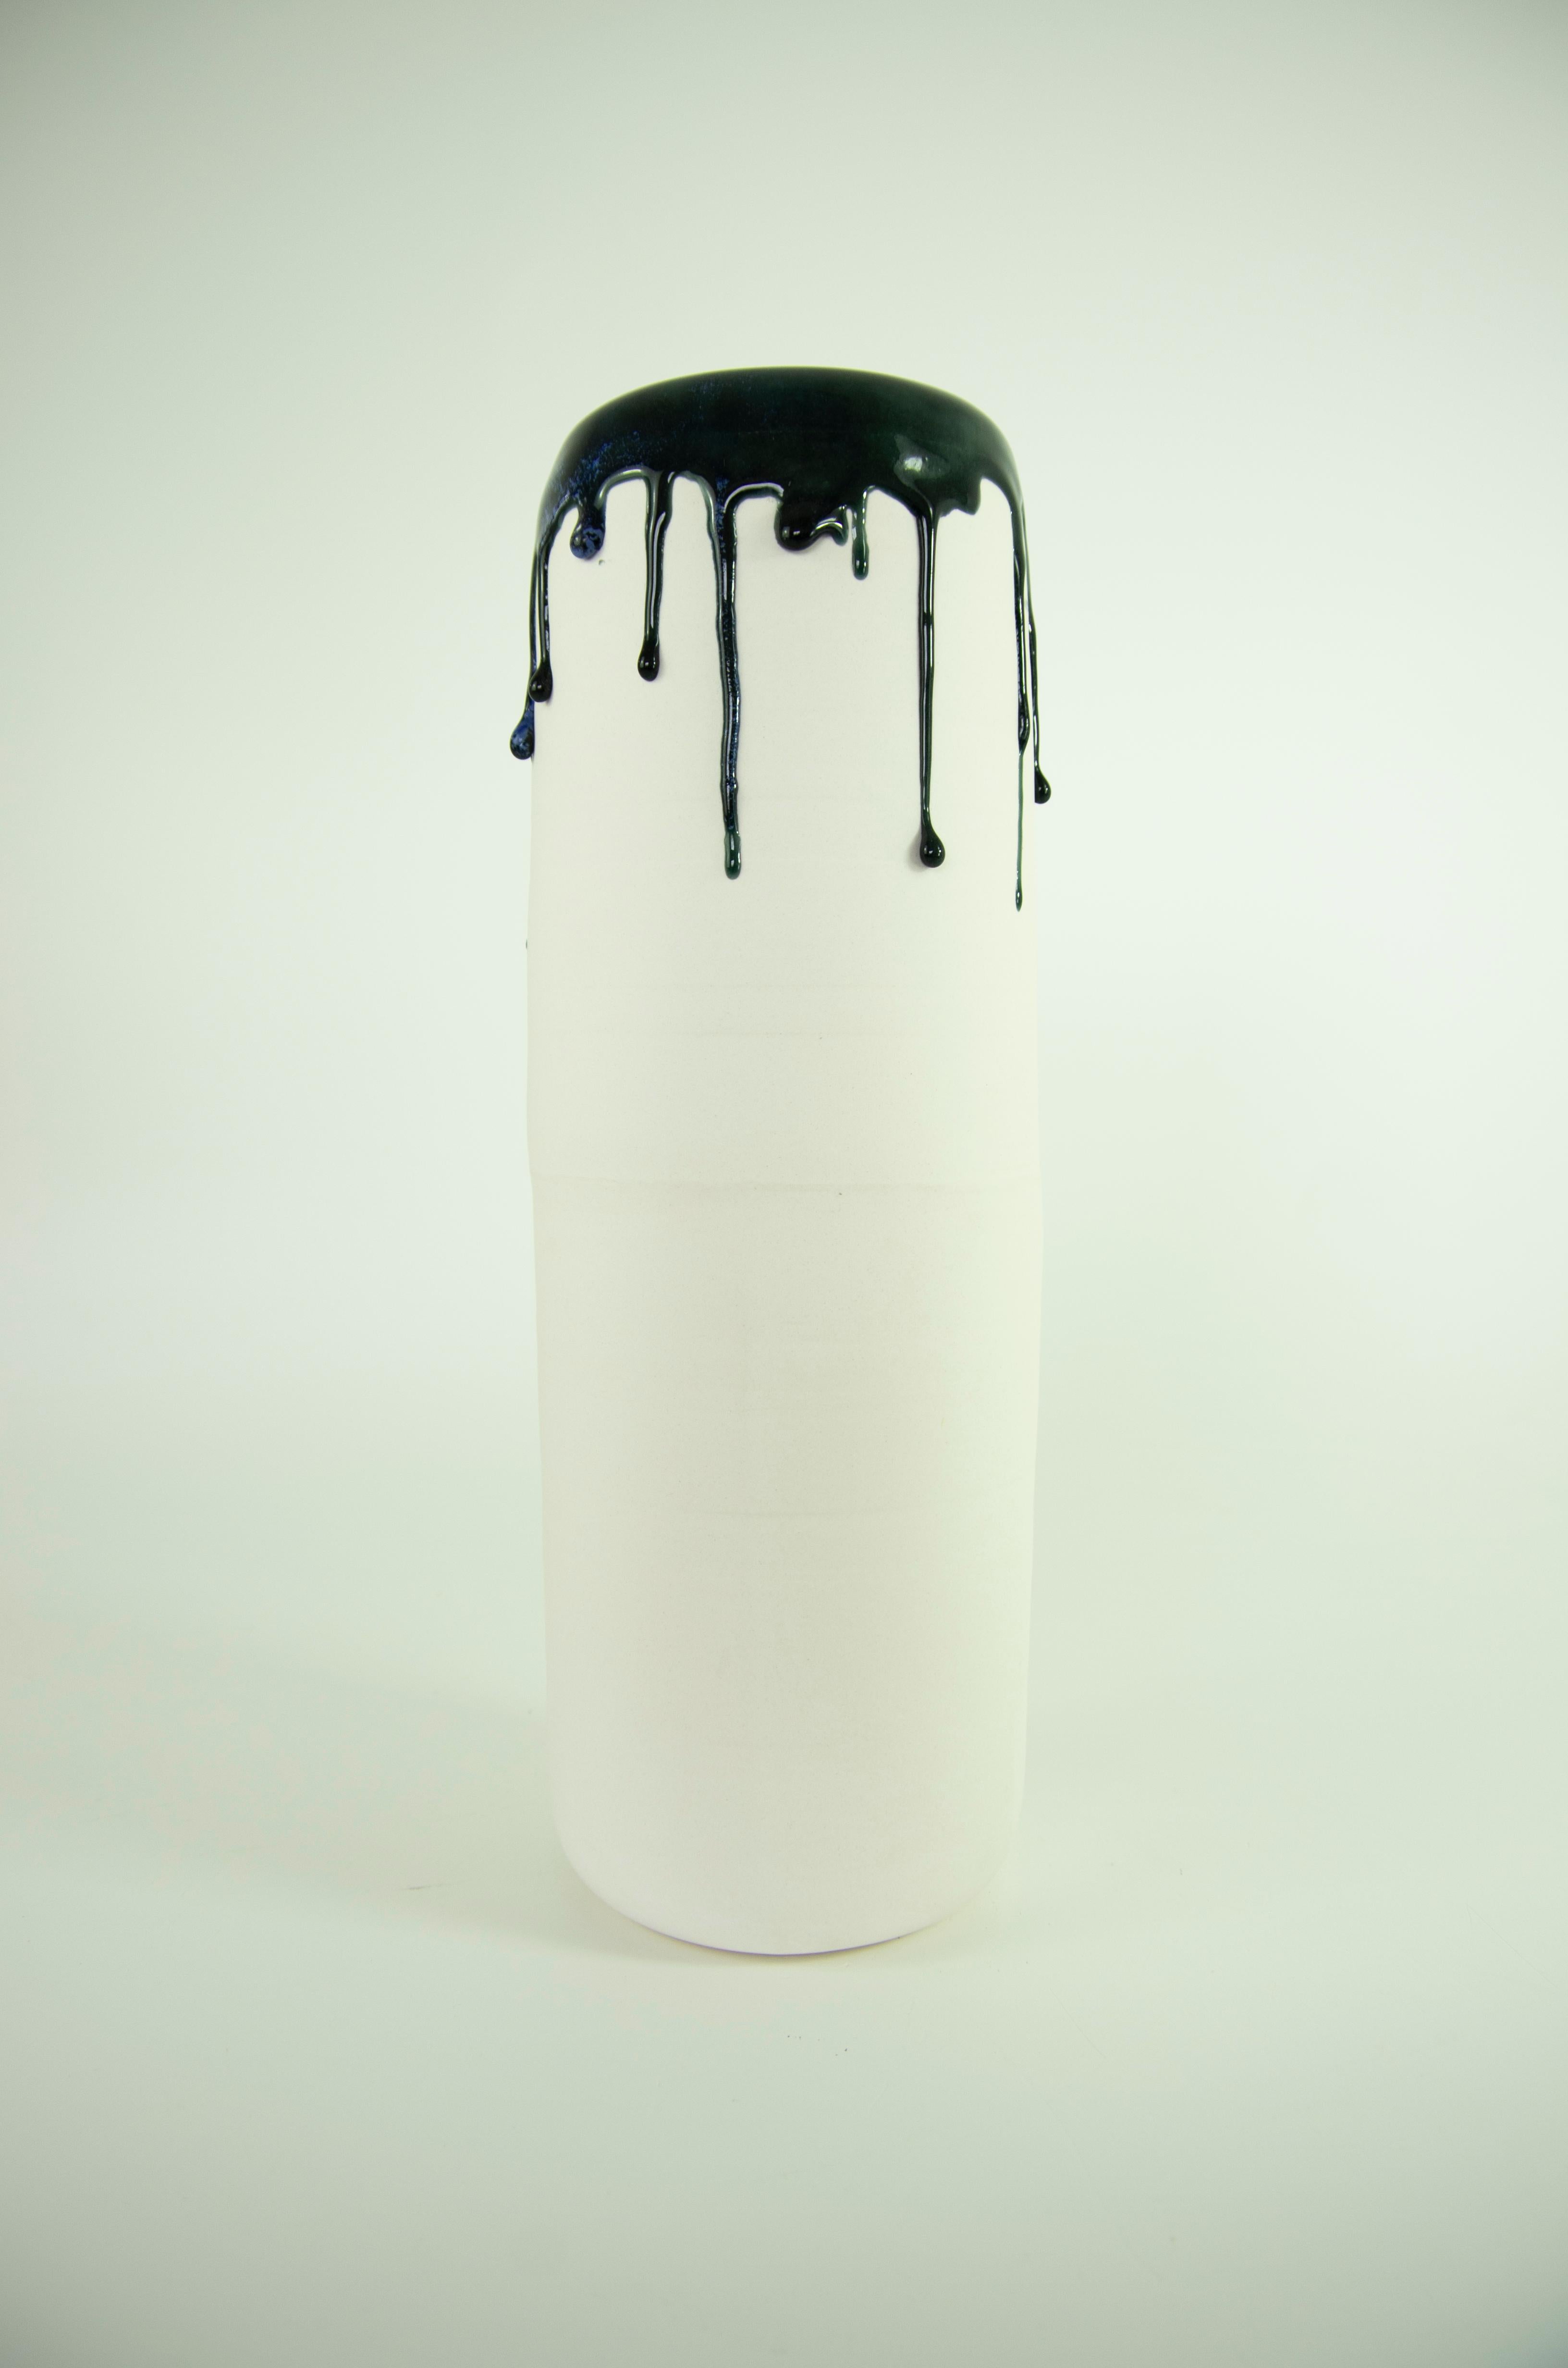 Volcano Love Black and Blue Single Decorative Object by Dora Stanczel
One of a Kind.
Dimensions: D 13 x W 13 x H 36 cm.
Materials: Porcelain and colored glaze.

Also available in different colors, and in a double version. Please contact us.

I